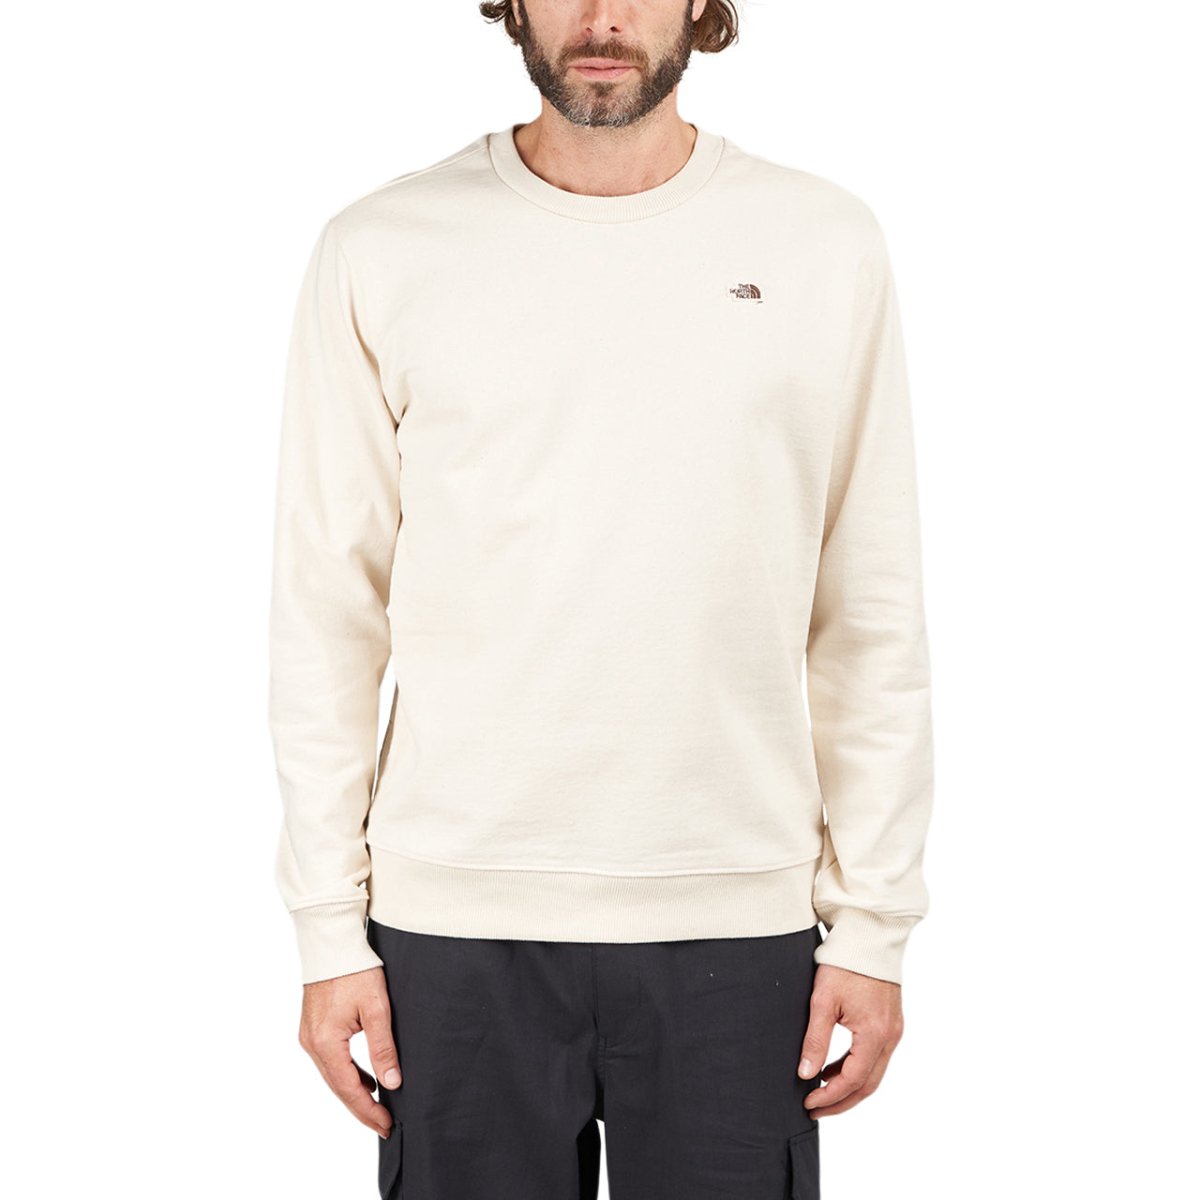 Image of The North Face Recycled Scrap Graphic Crewneck Sweater (Raw Undyed)